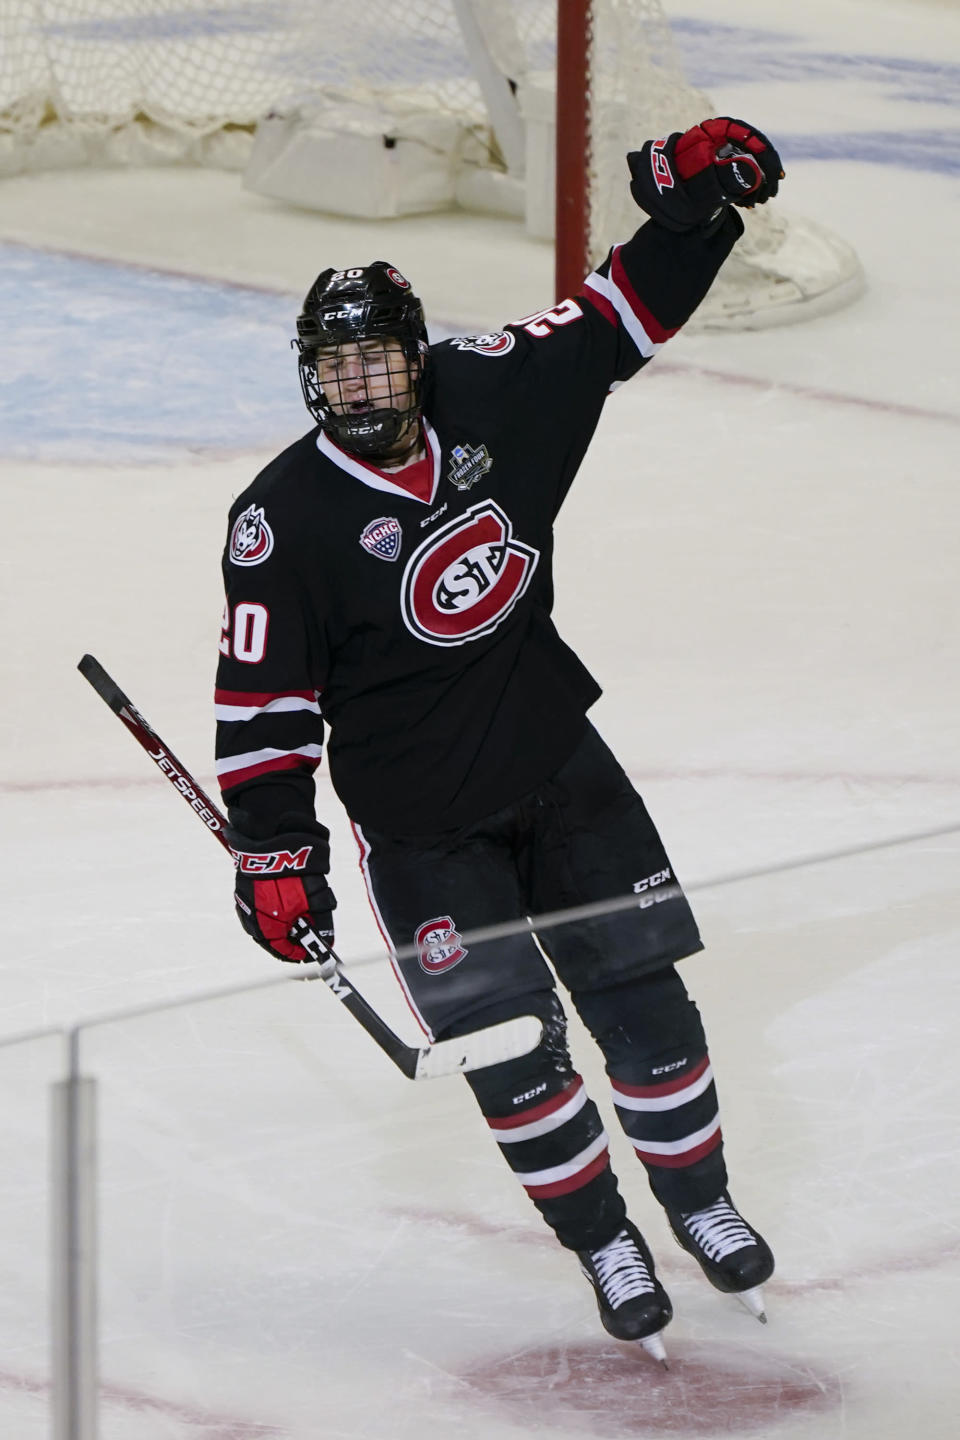 St. Cloud State's Nolan Walker celebrates after scoring a goal with less than a minute left to break a tie against Minnesota State during the third period of an NCAA men's Frozen Four hockey semifinal in Pittsburgh, Thursday, April 8, 2021. St. Cloud State won 5-4 to advance to the championship game Saturday. (AP Photo/Keith Srakocic)